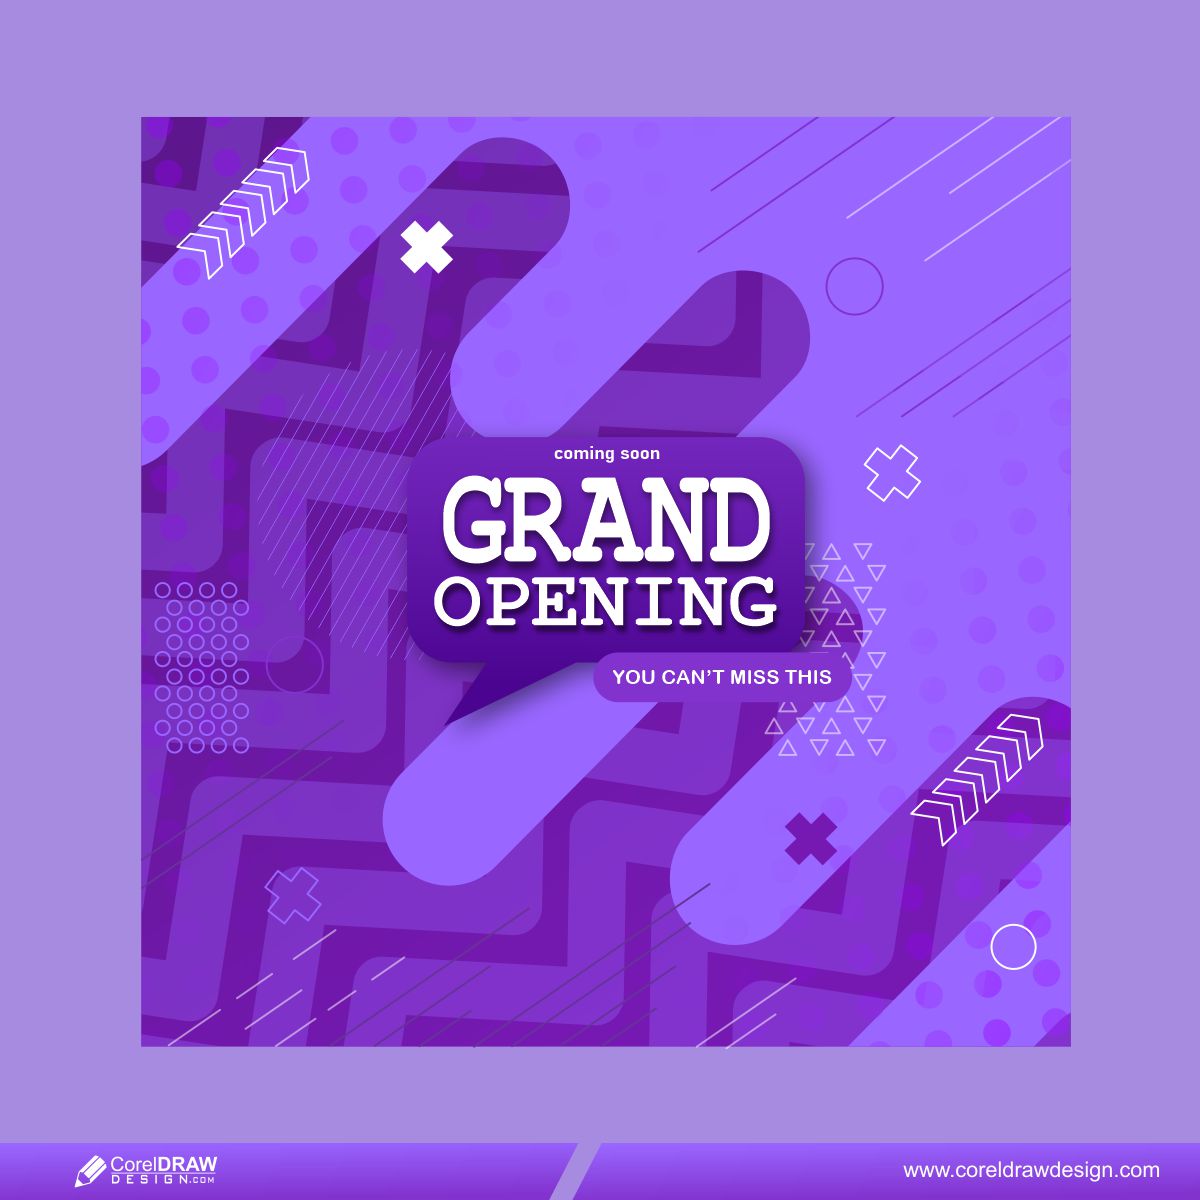 Grand opening soon promo background Free Vector